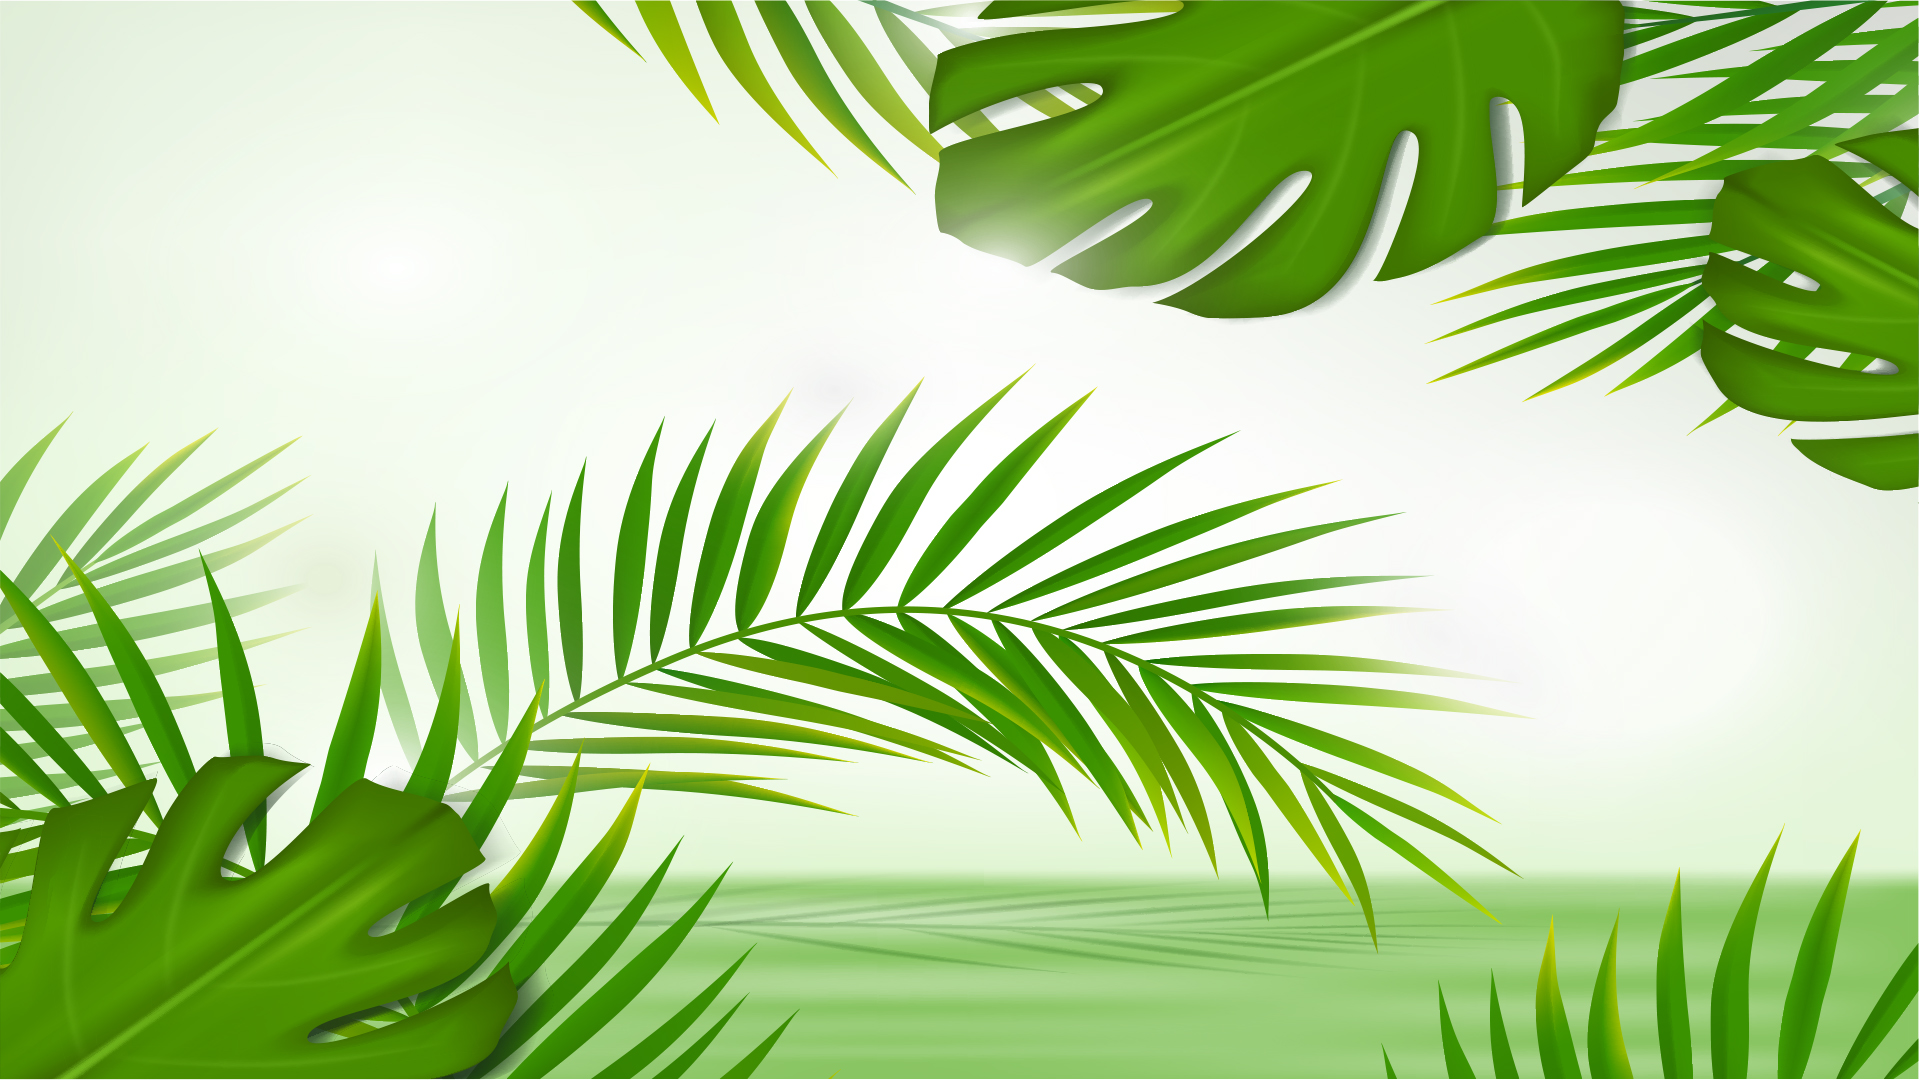 nature powerpoint backgrounds